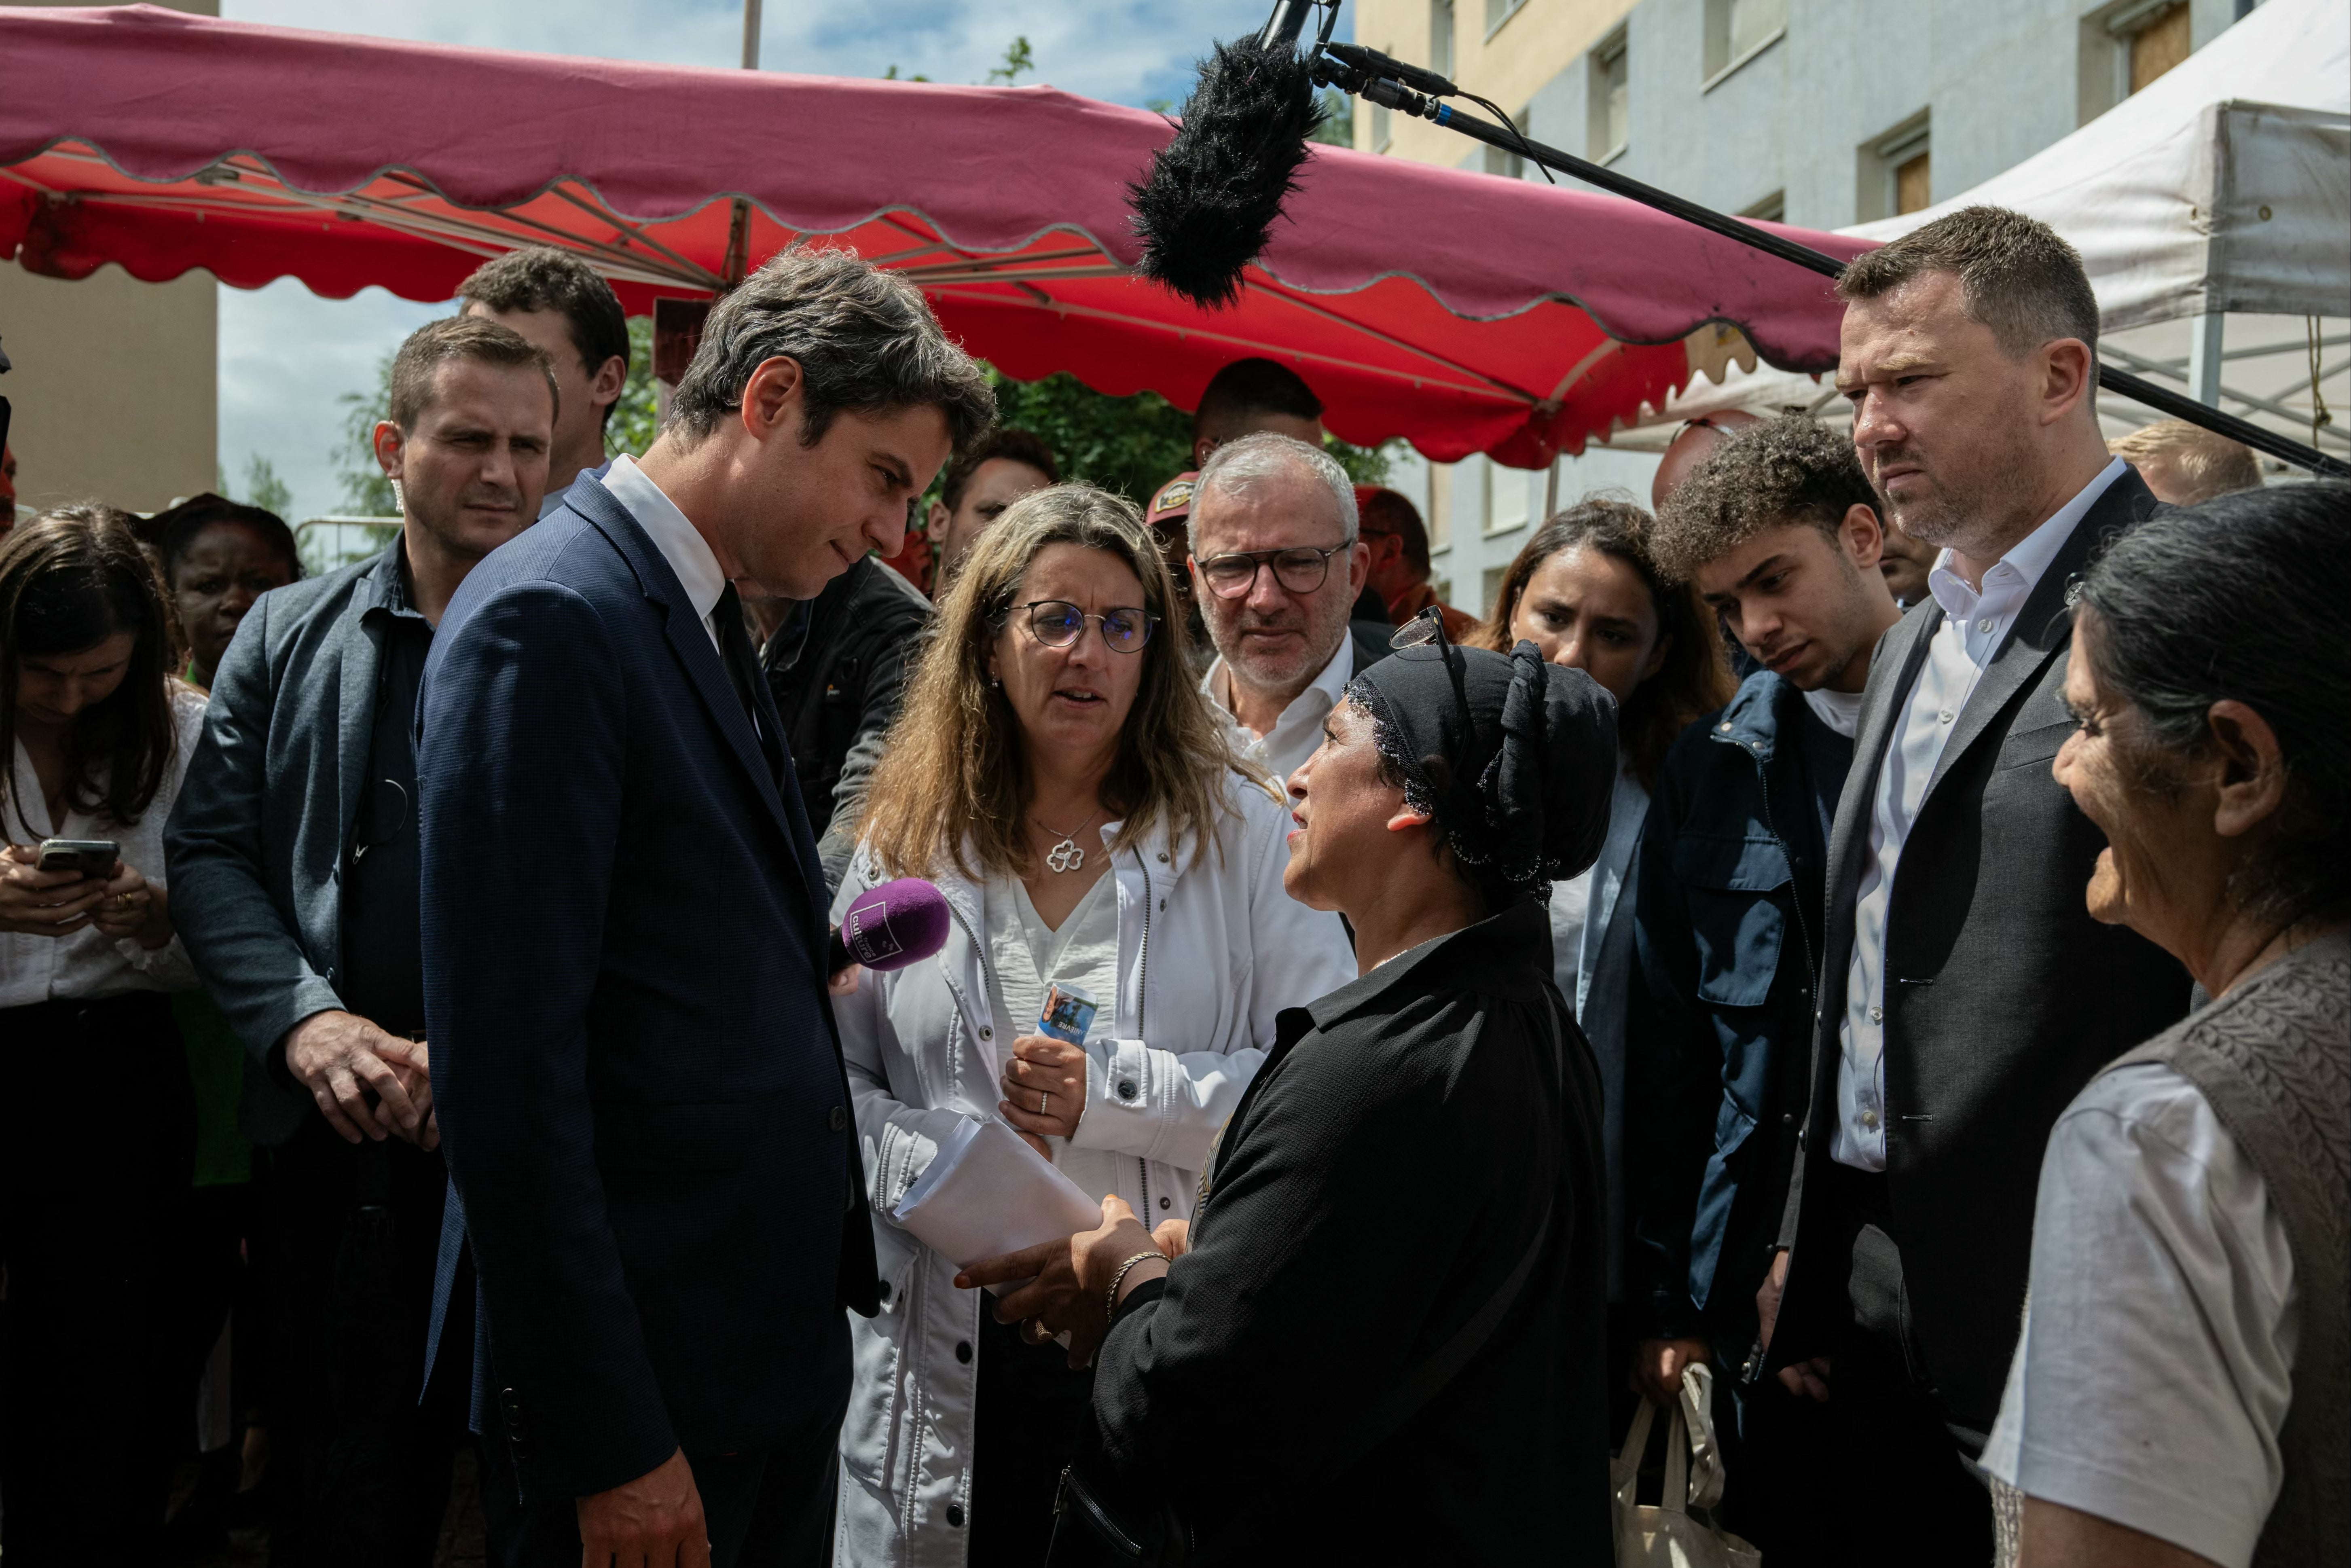 France’s prime minister Gabriel Attal, front left, on the campaign trail